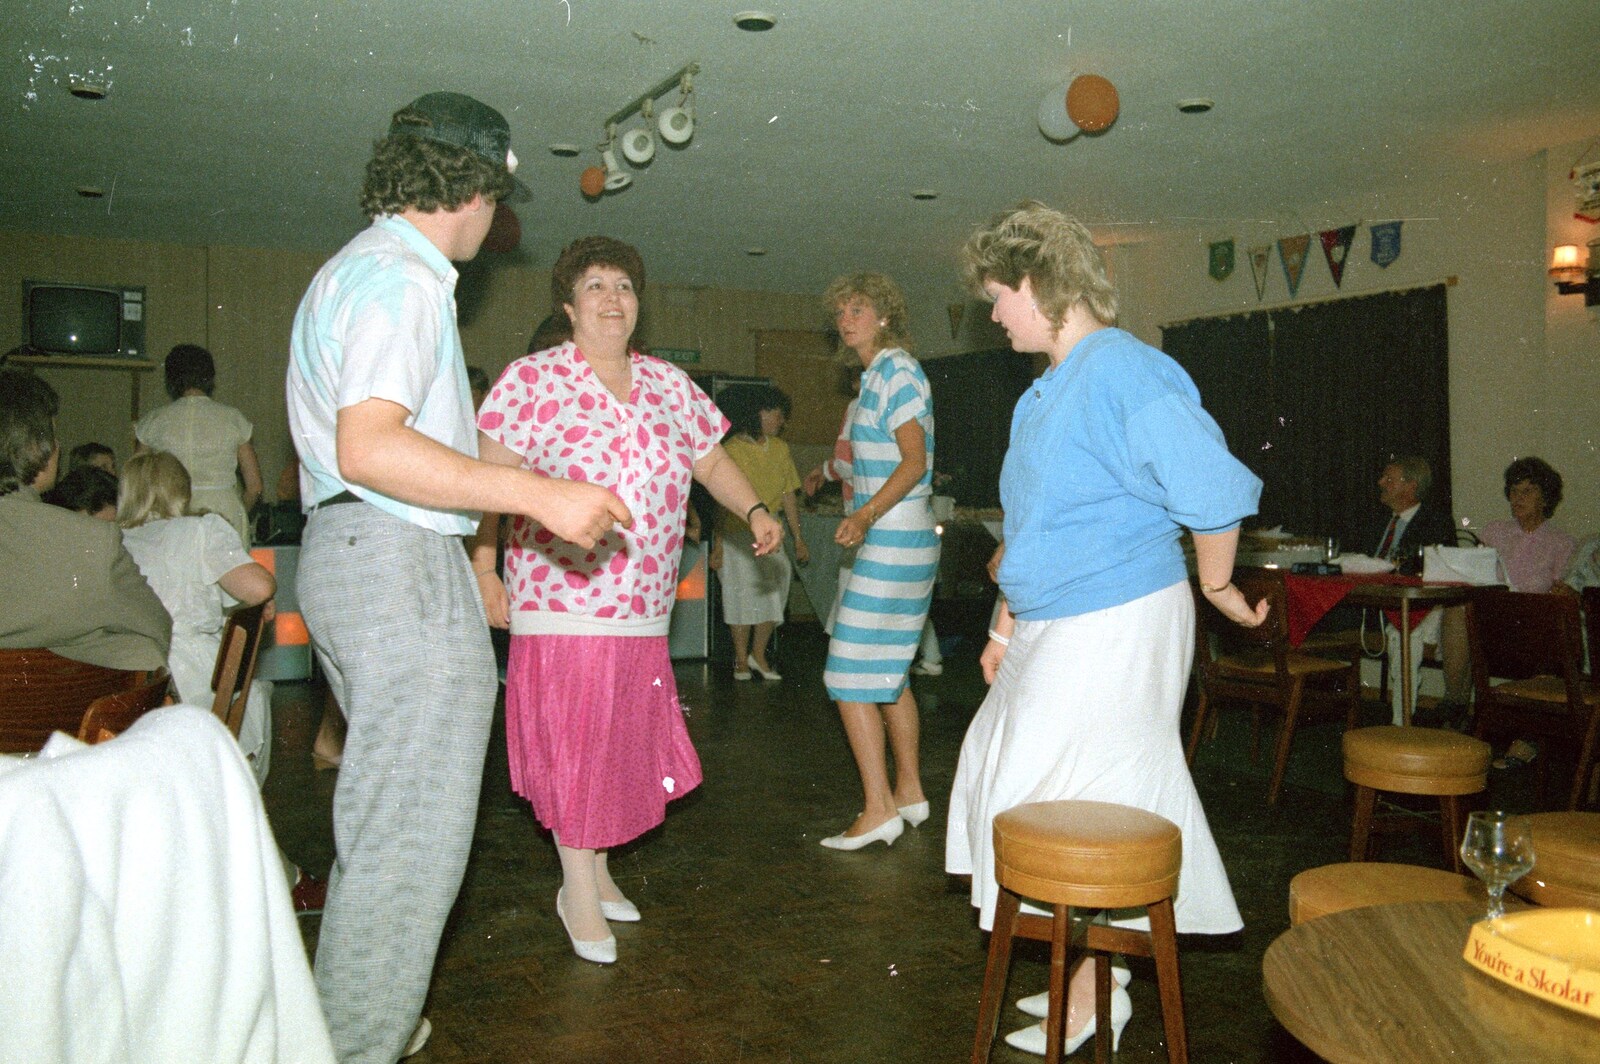 Hotlips and Pink Lady dancing from A CB Wedding and a Derelict Railway, Hampshire - 20th July 1986